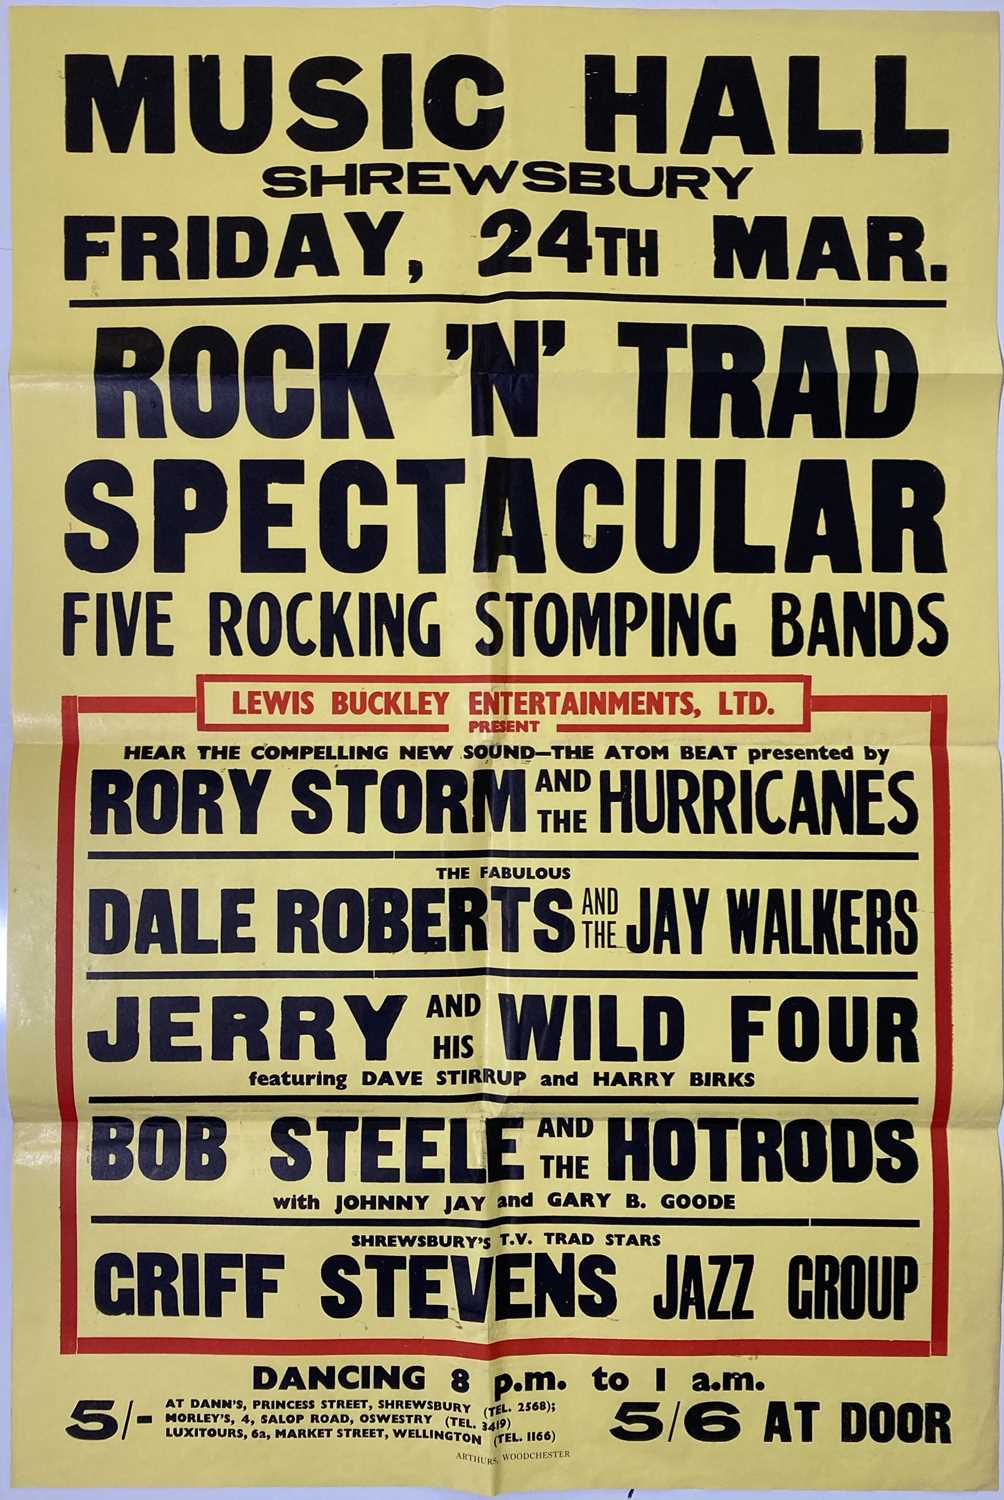 Lot 198 - RORY STORM AND THE HURRICANES - 1961 POSTER.